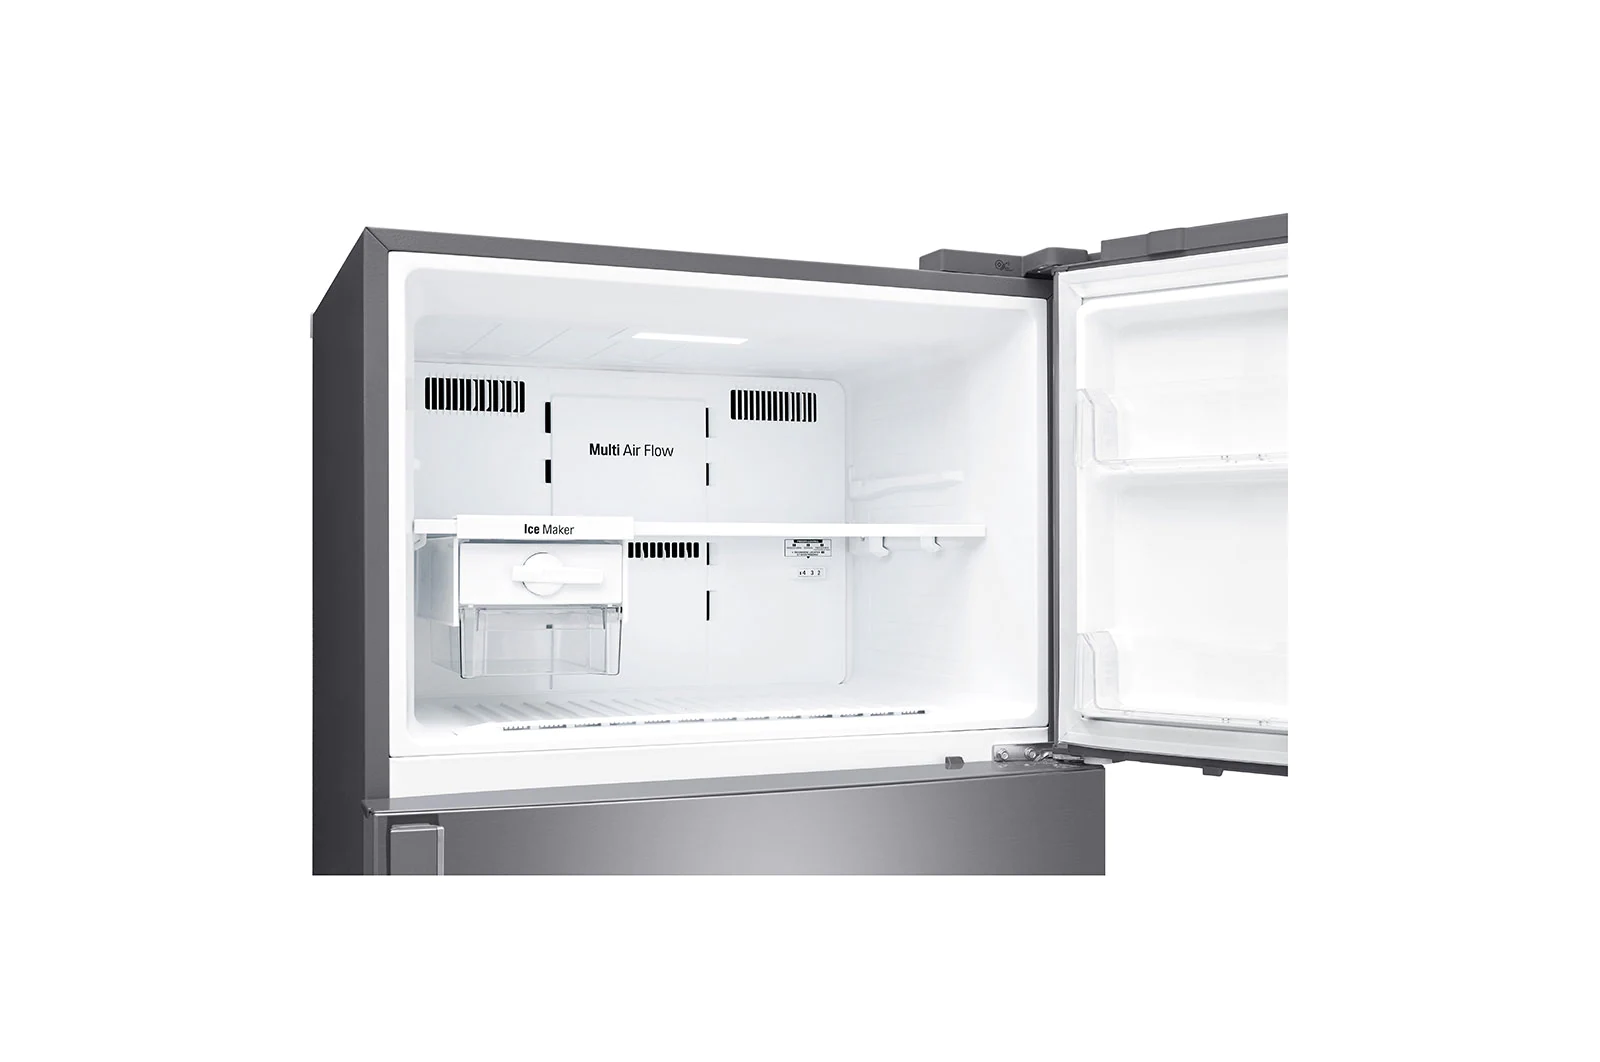 LG 516L Refrigerator With DoorCooling+™ Technology - Silver